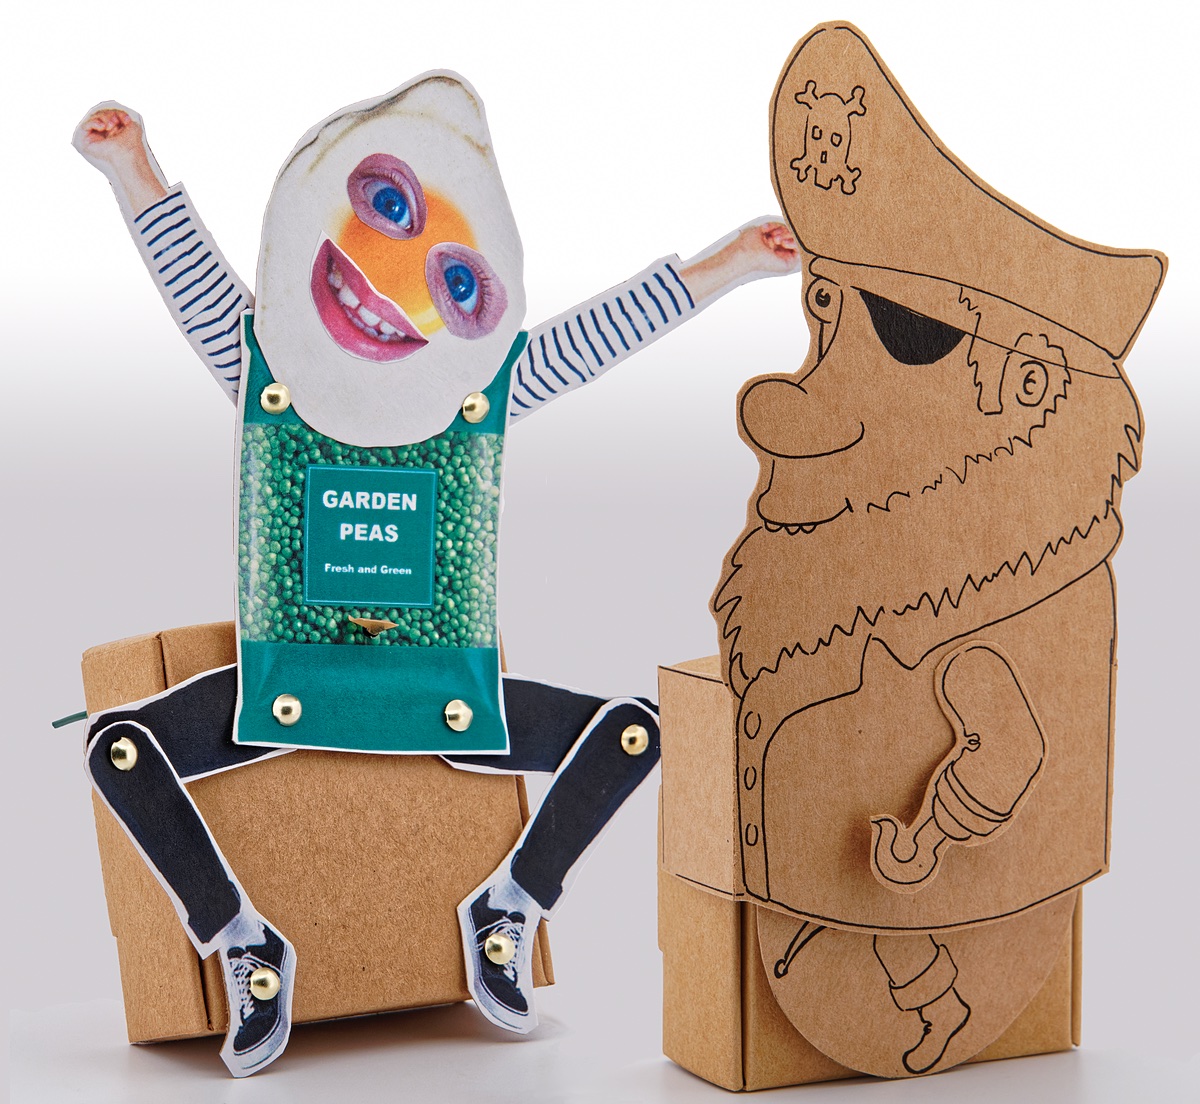 2 card automata, 1 hand drawn pirate on brown card and 1 collage character made with a bag of peas and fried egg.